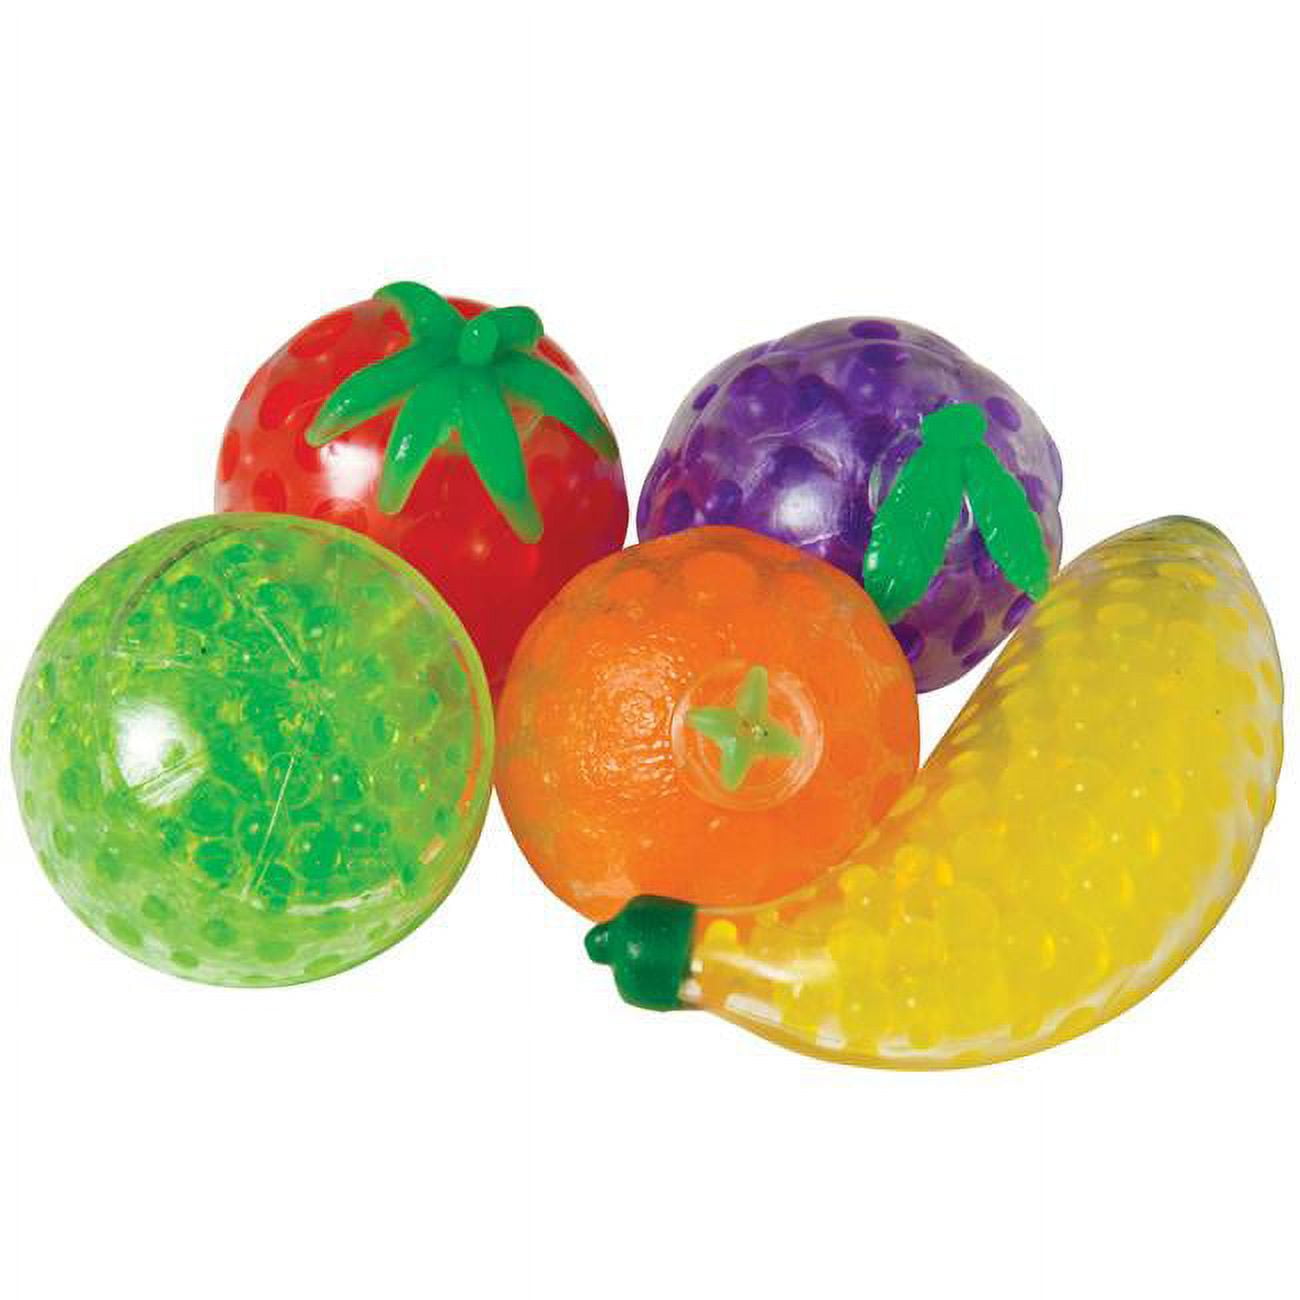 2 In. Dia. Fruity Beads Squish Ball - 12 Count - Case Of 12